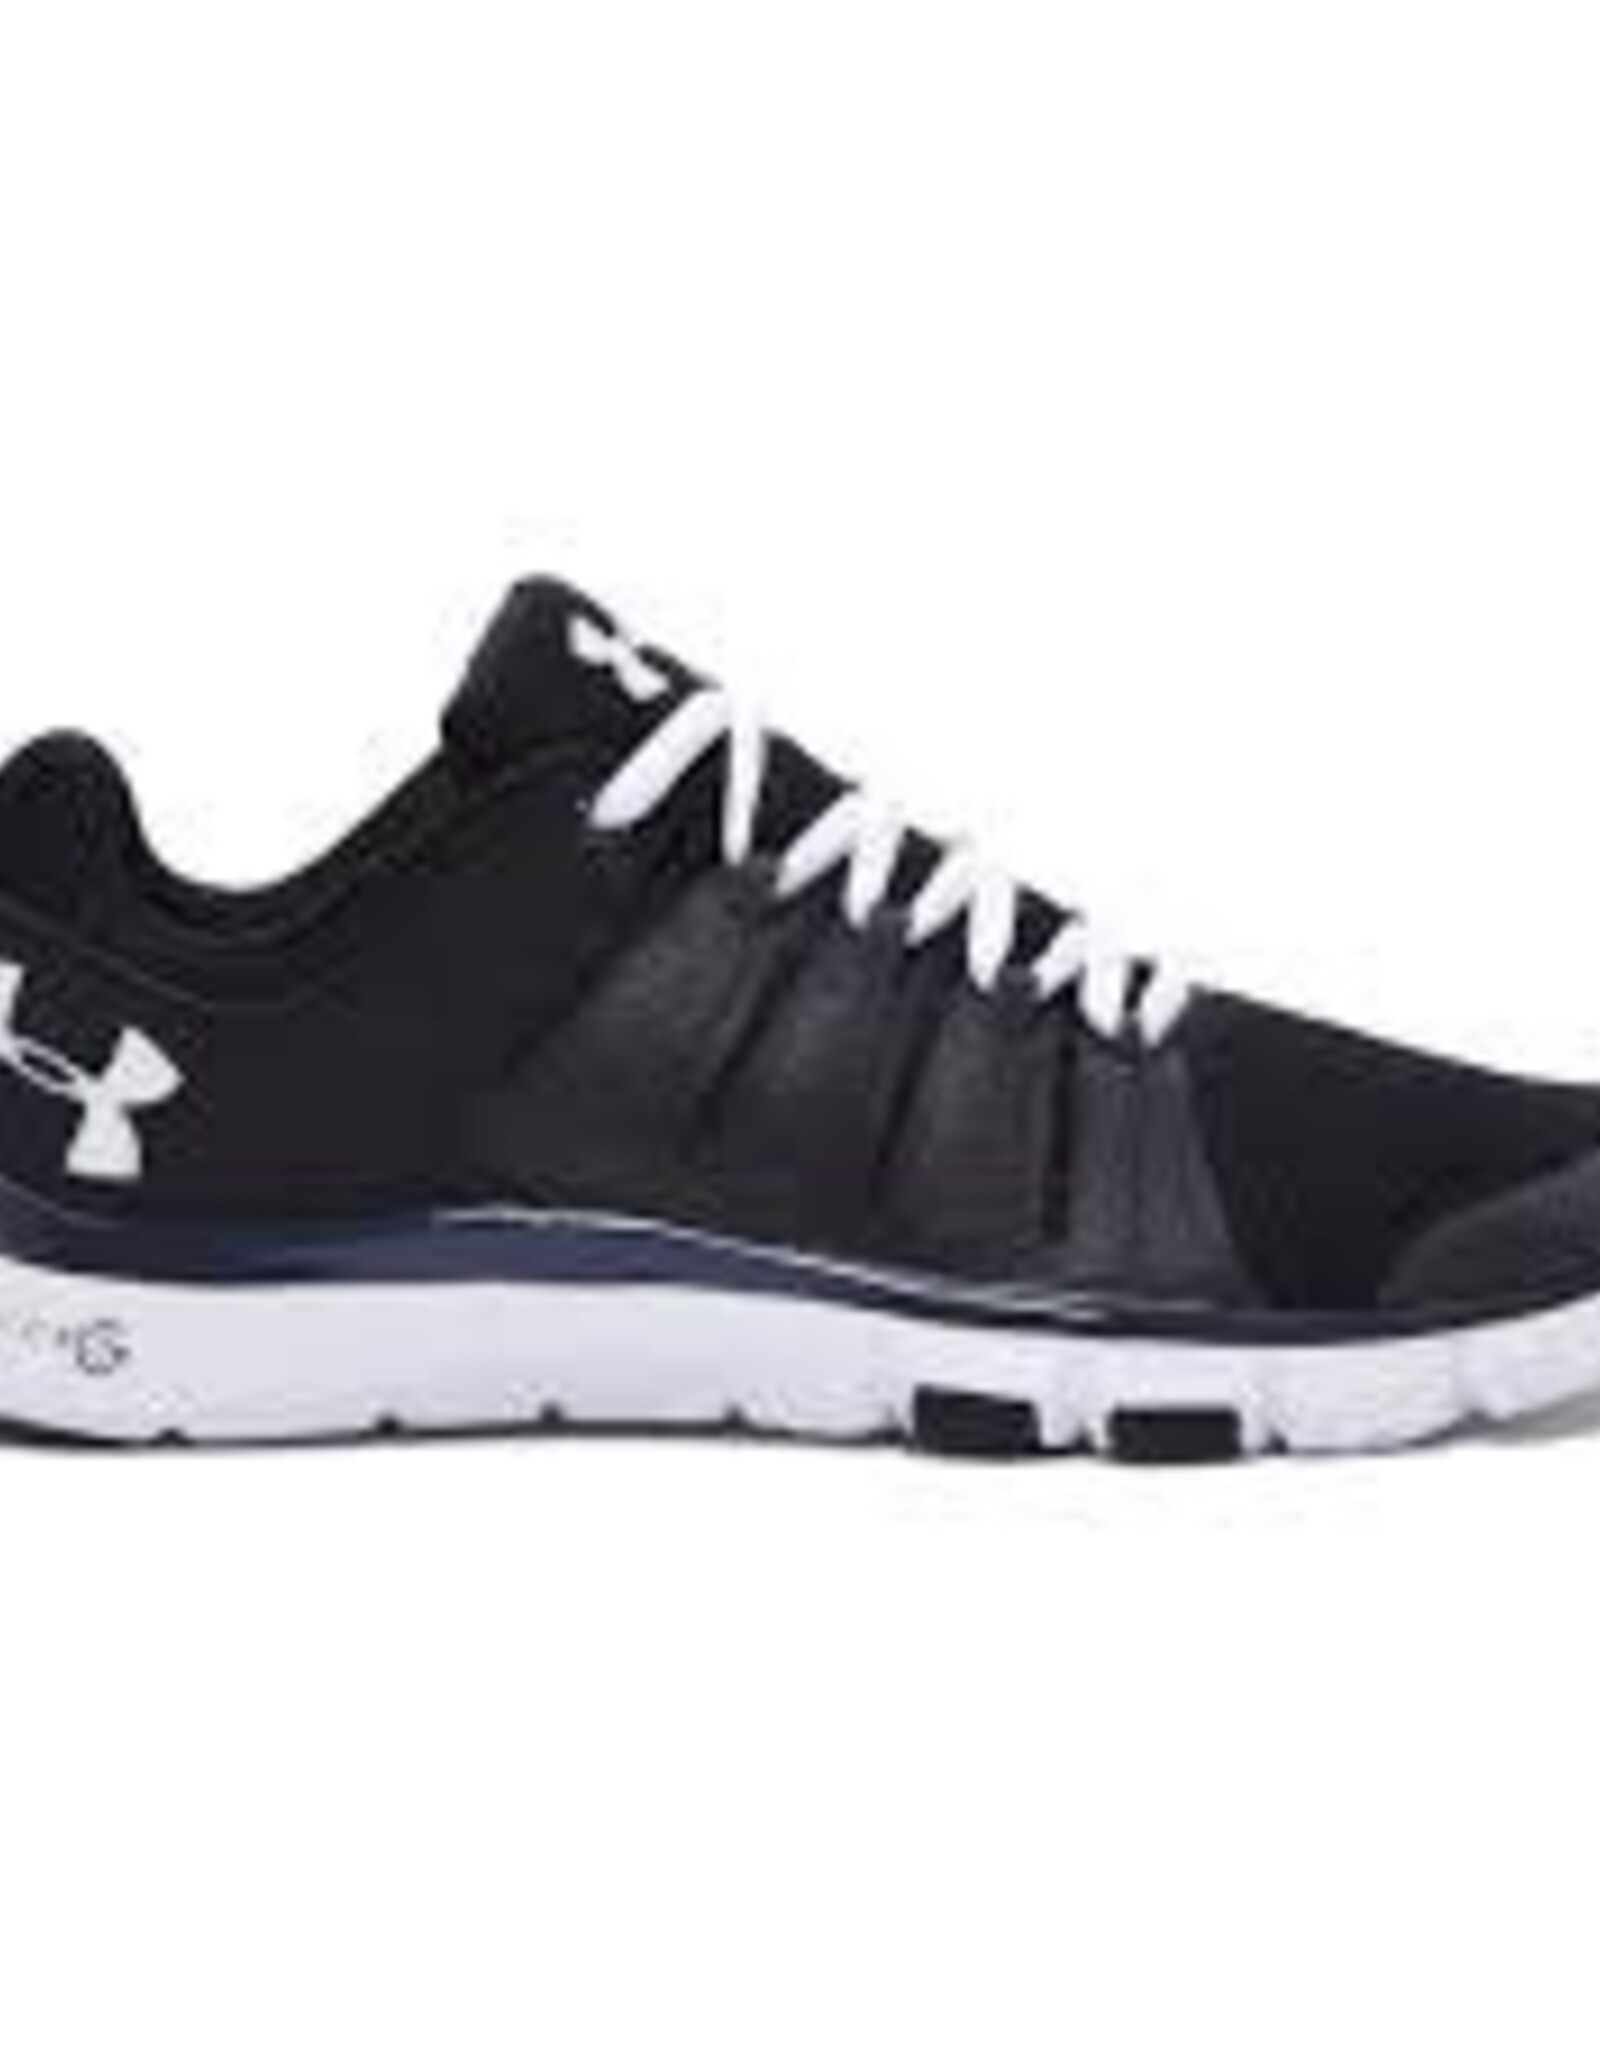 Under Armour UA MICRO G LIMITLESS TR 2 (8)